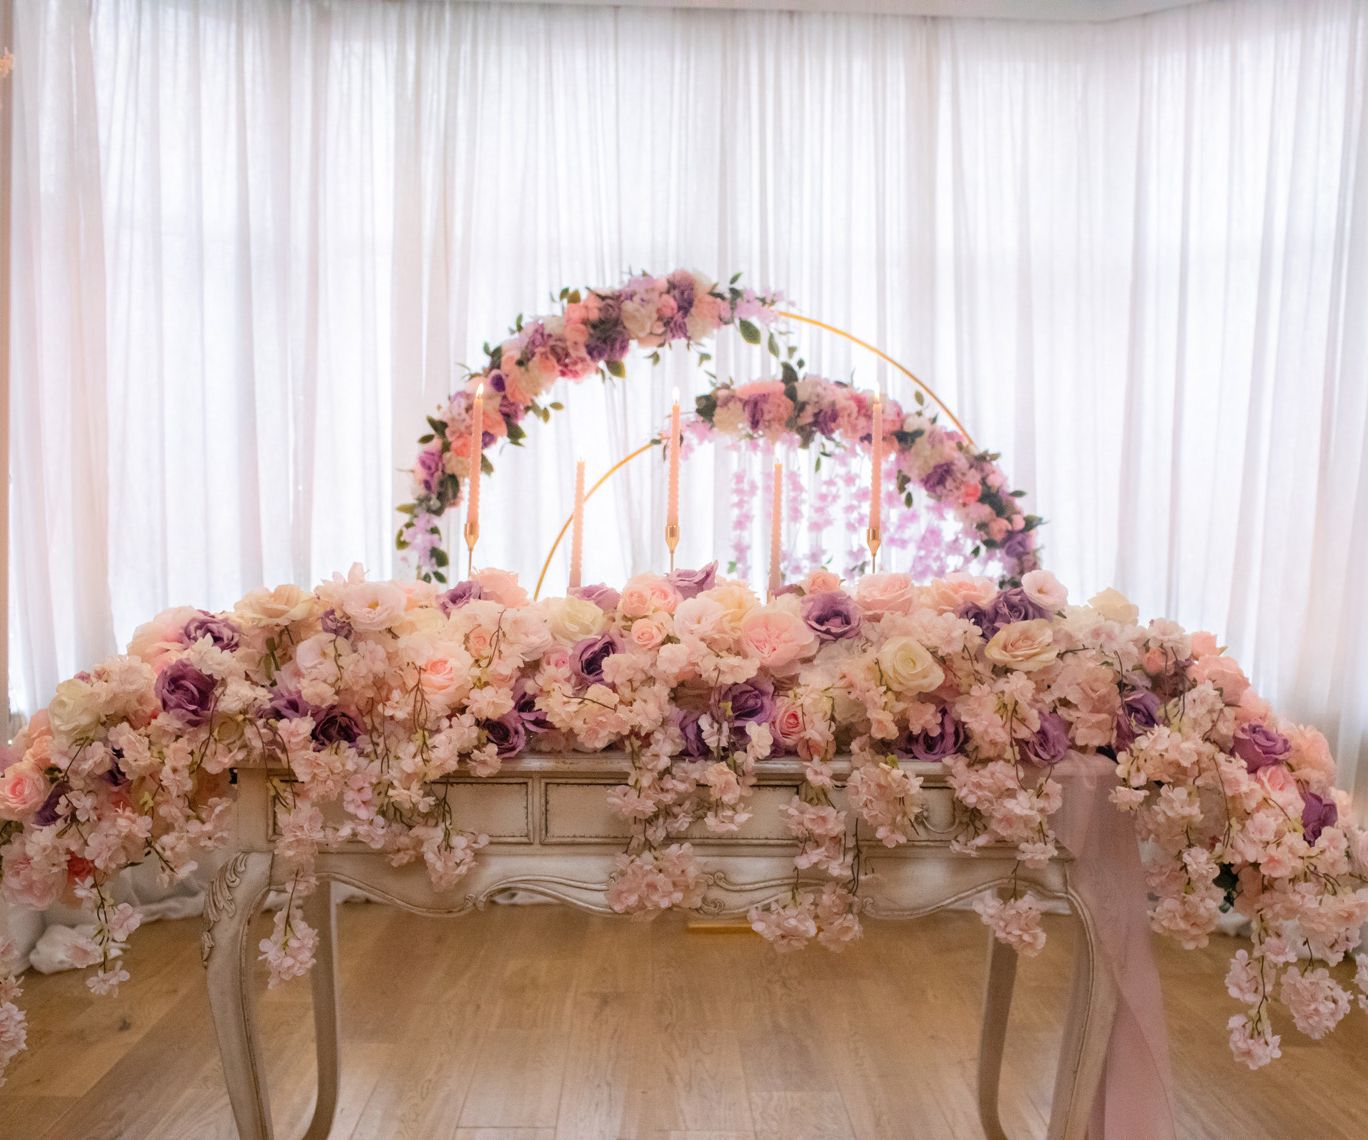 Wedding floral moongate backdrop hire venue dressing in Cheshire